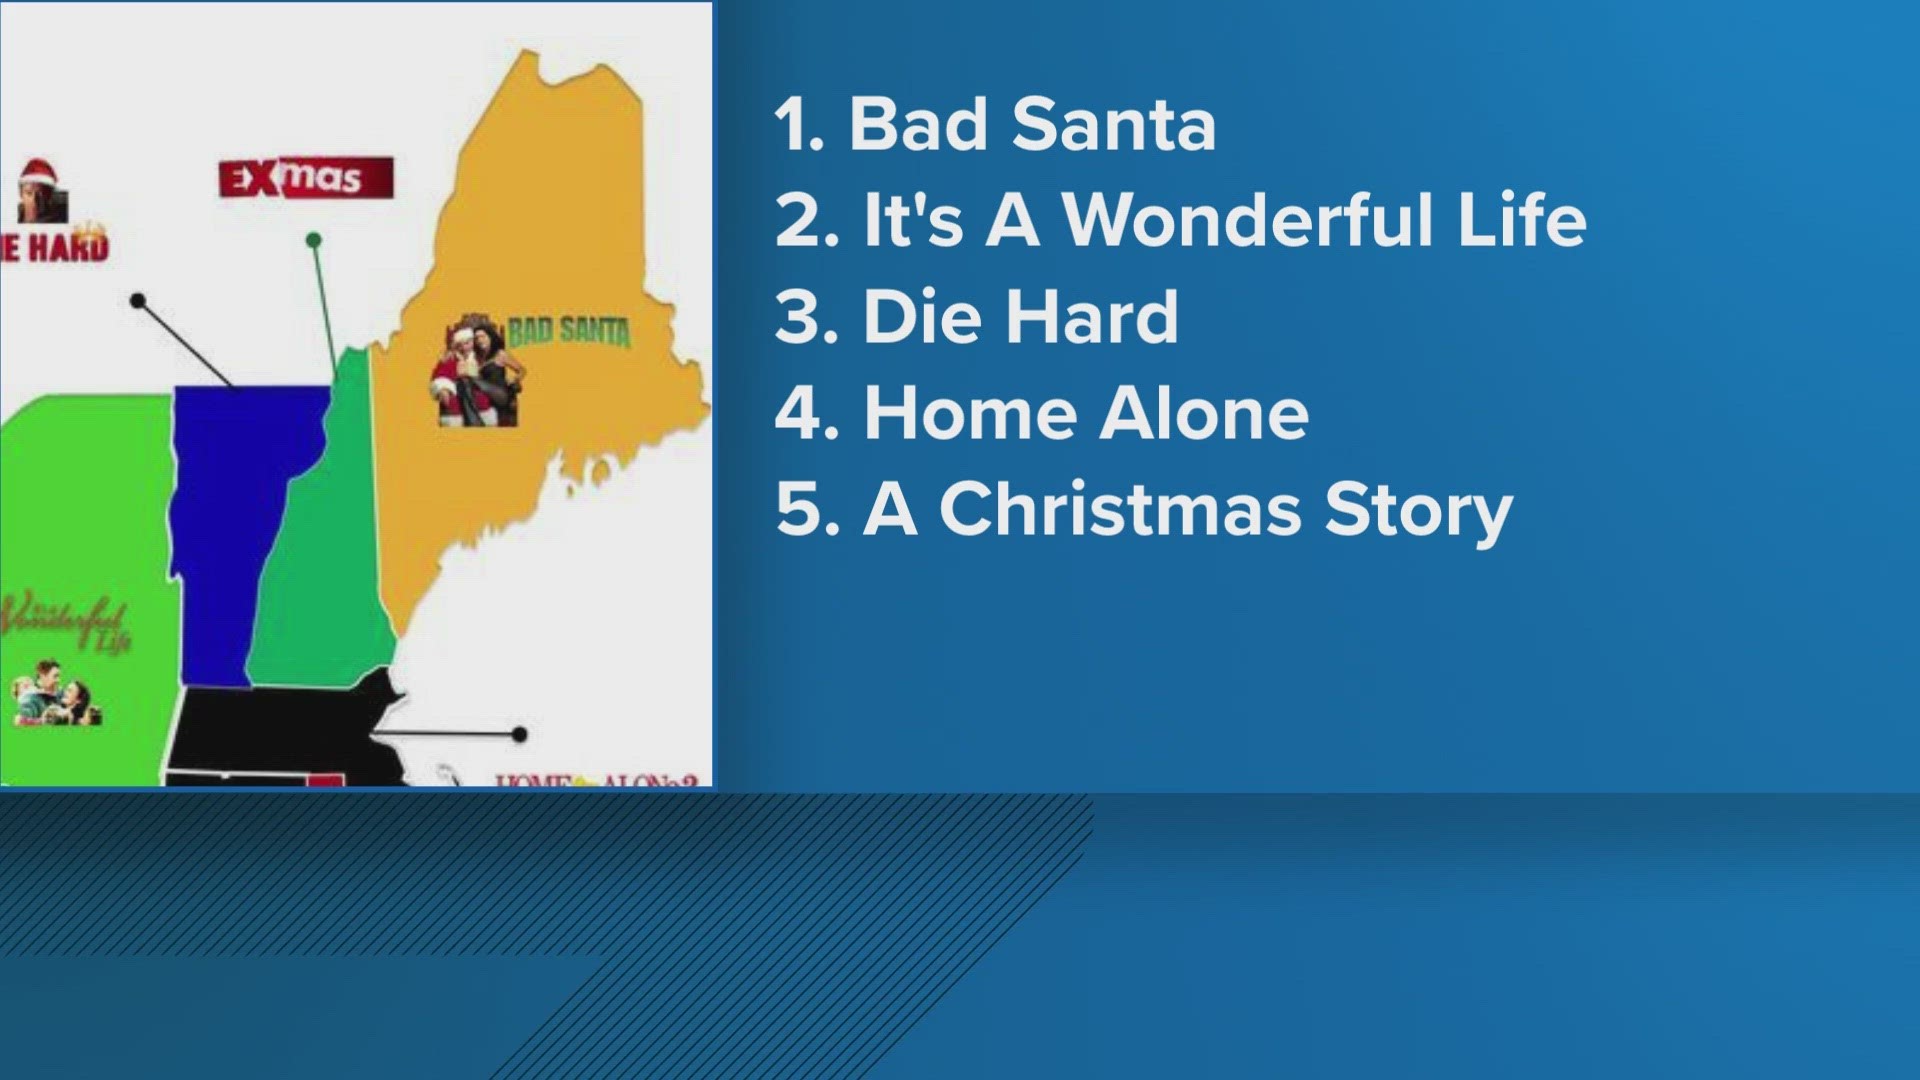 In Maine, marketing agency HubScore reported that "Bad Santa" came out in the No. 1 spot, with "It's a Wonderful Life" coming in second place.